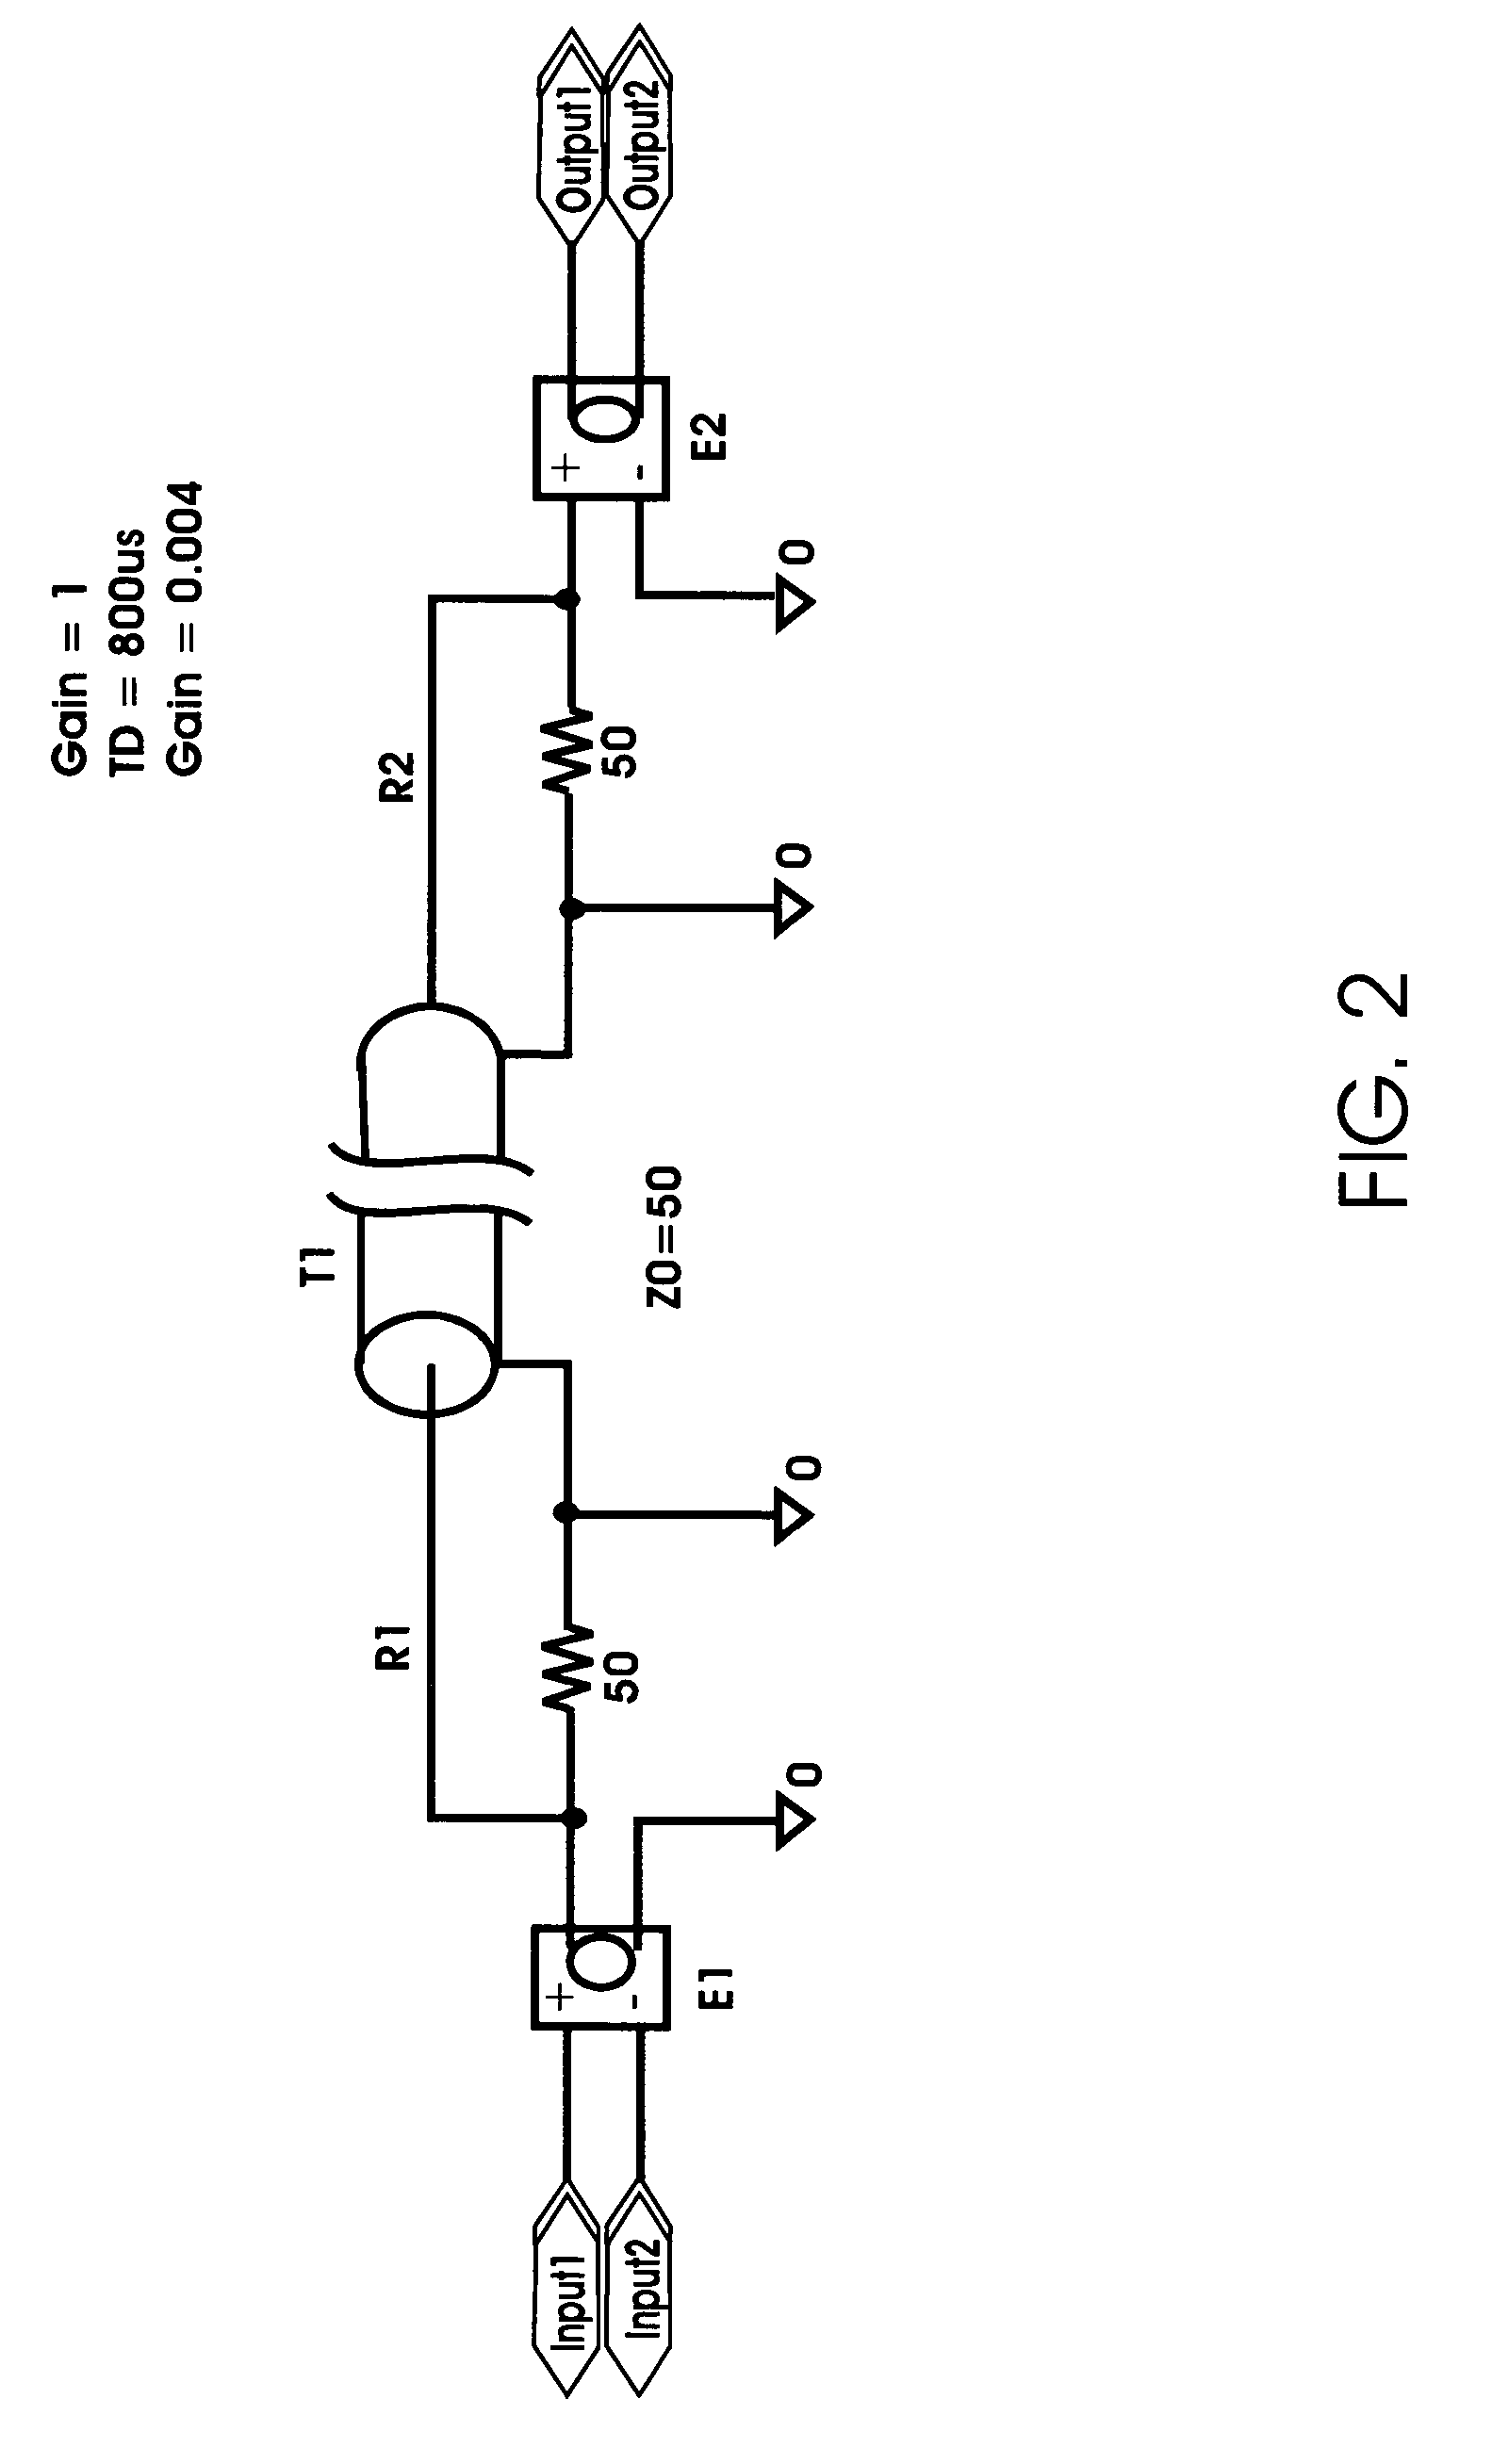 System and method for eliminating audible noise for ultrasonic transducers